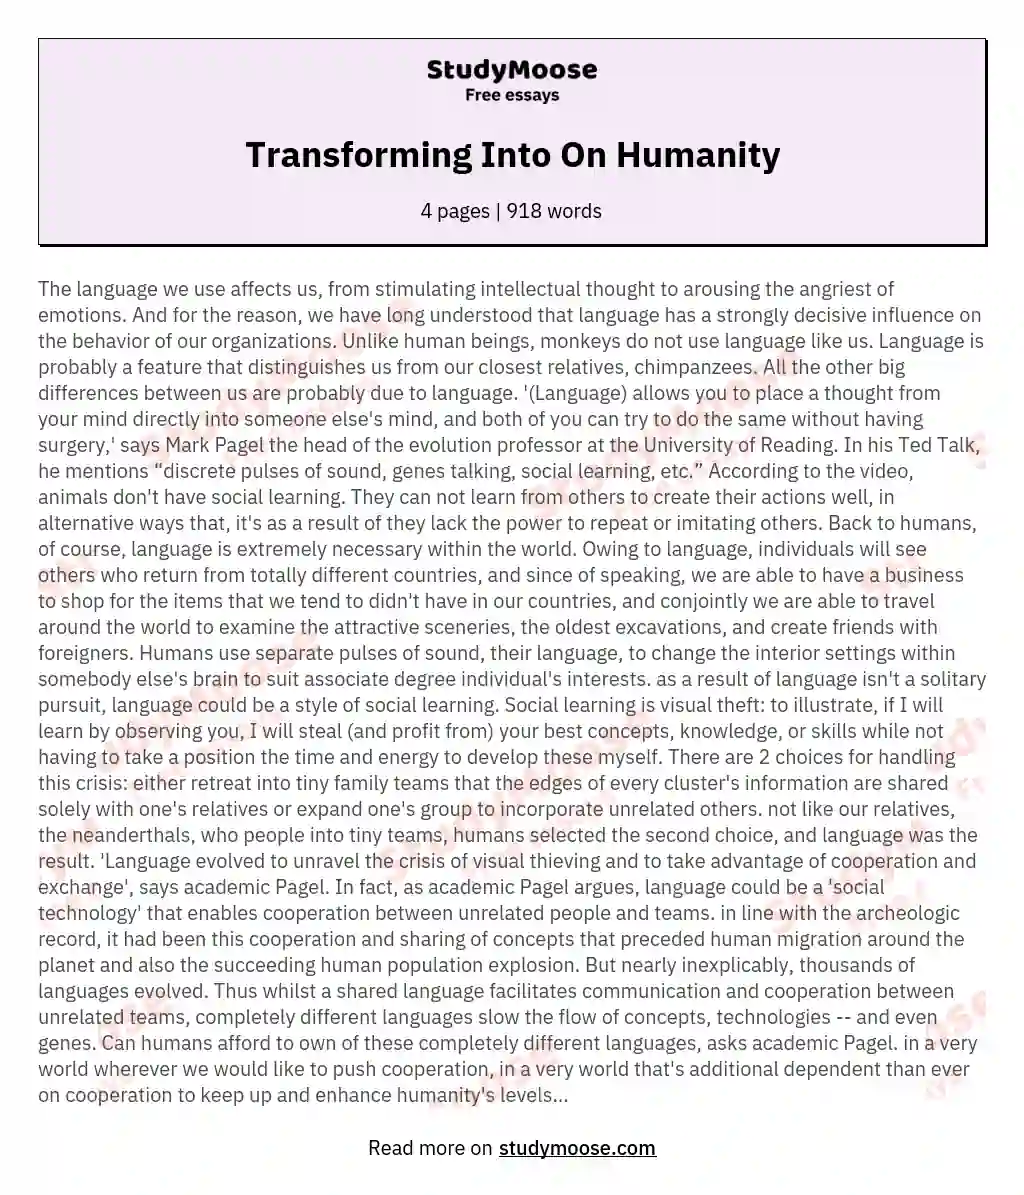 Transforming Into On Humanity essay